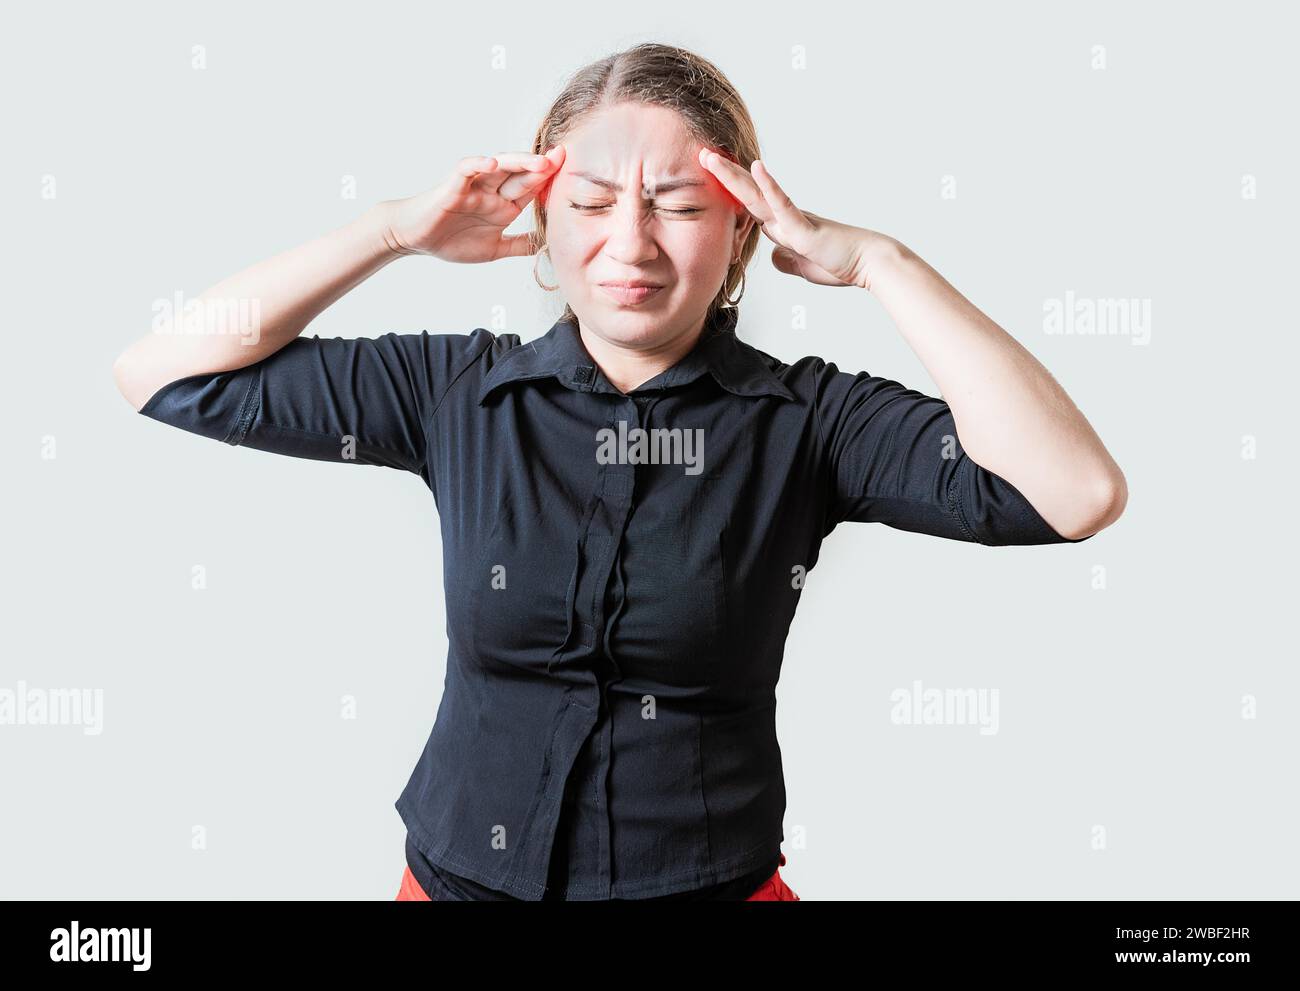 Young woman with headache isolated. Portrait of girl suffering from migraine on isolated background. Headache concept Stock Photo